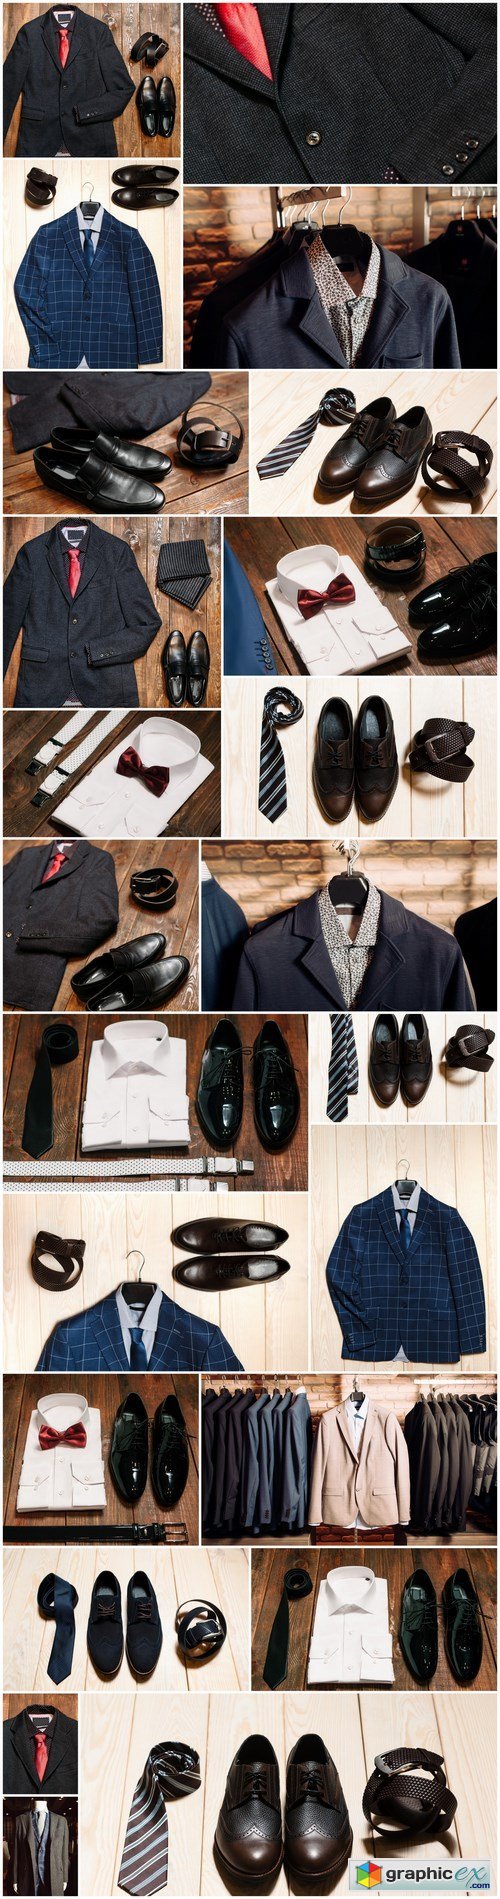 Men's Clothing and Accessories 2 - 23xUHQ JPEG